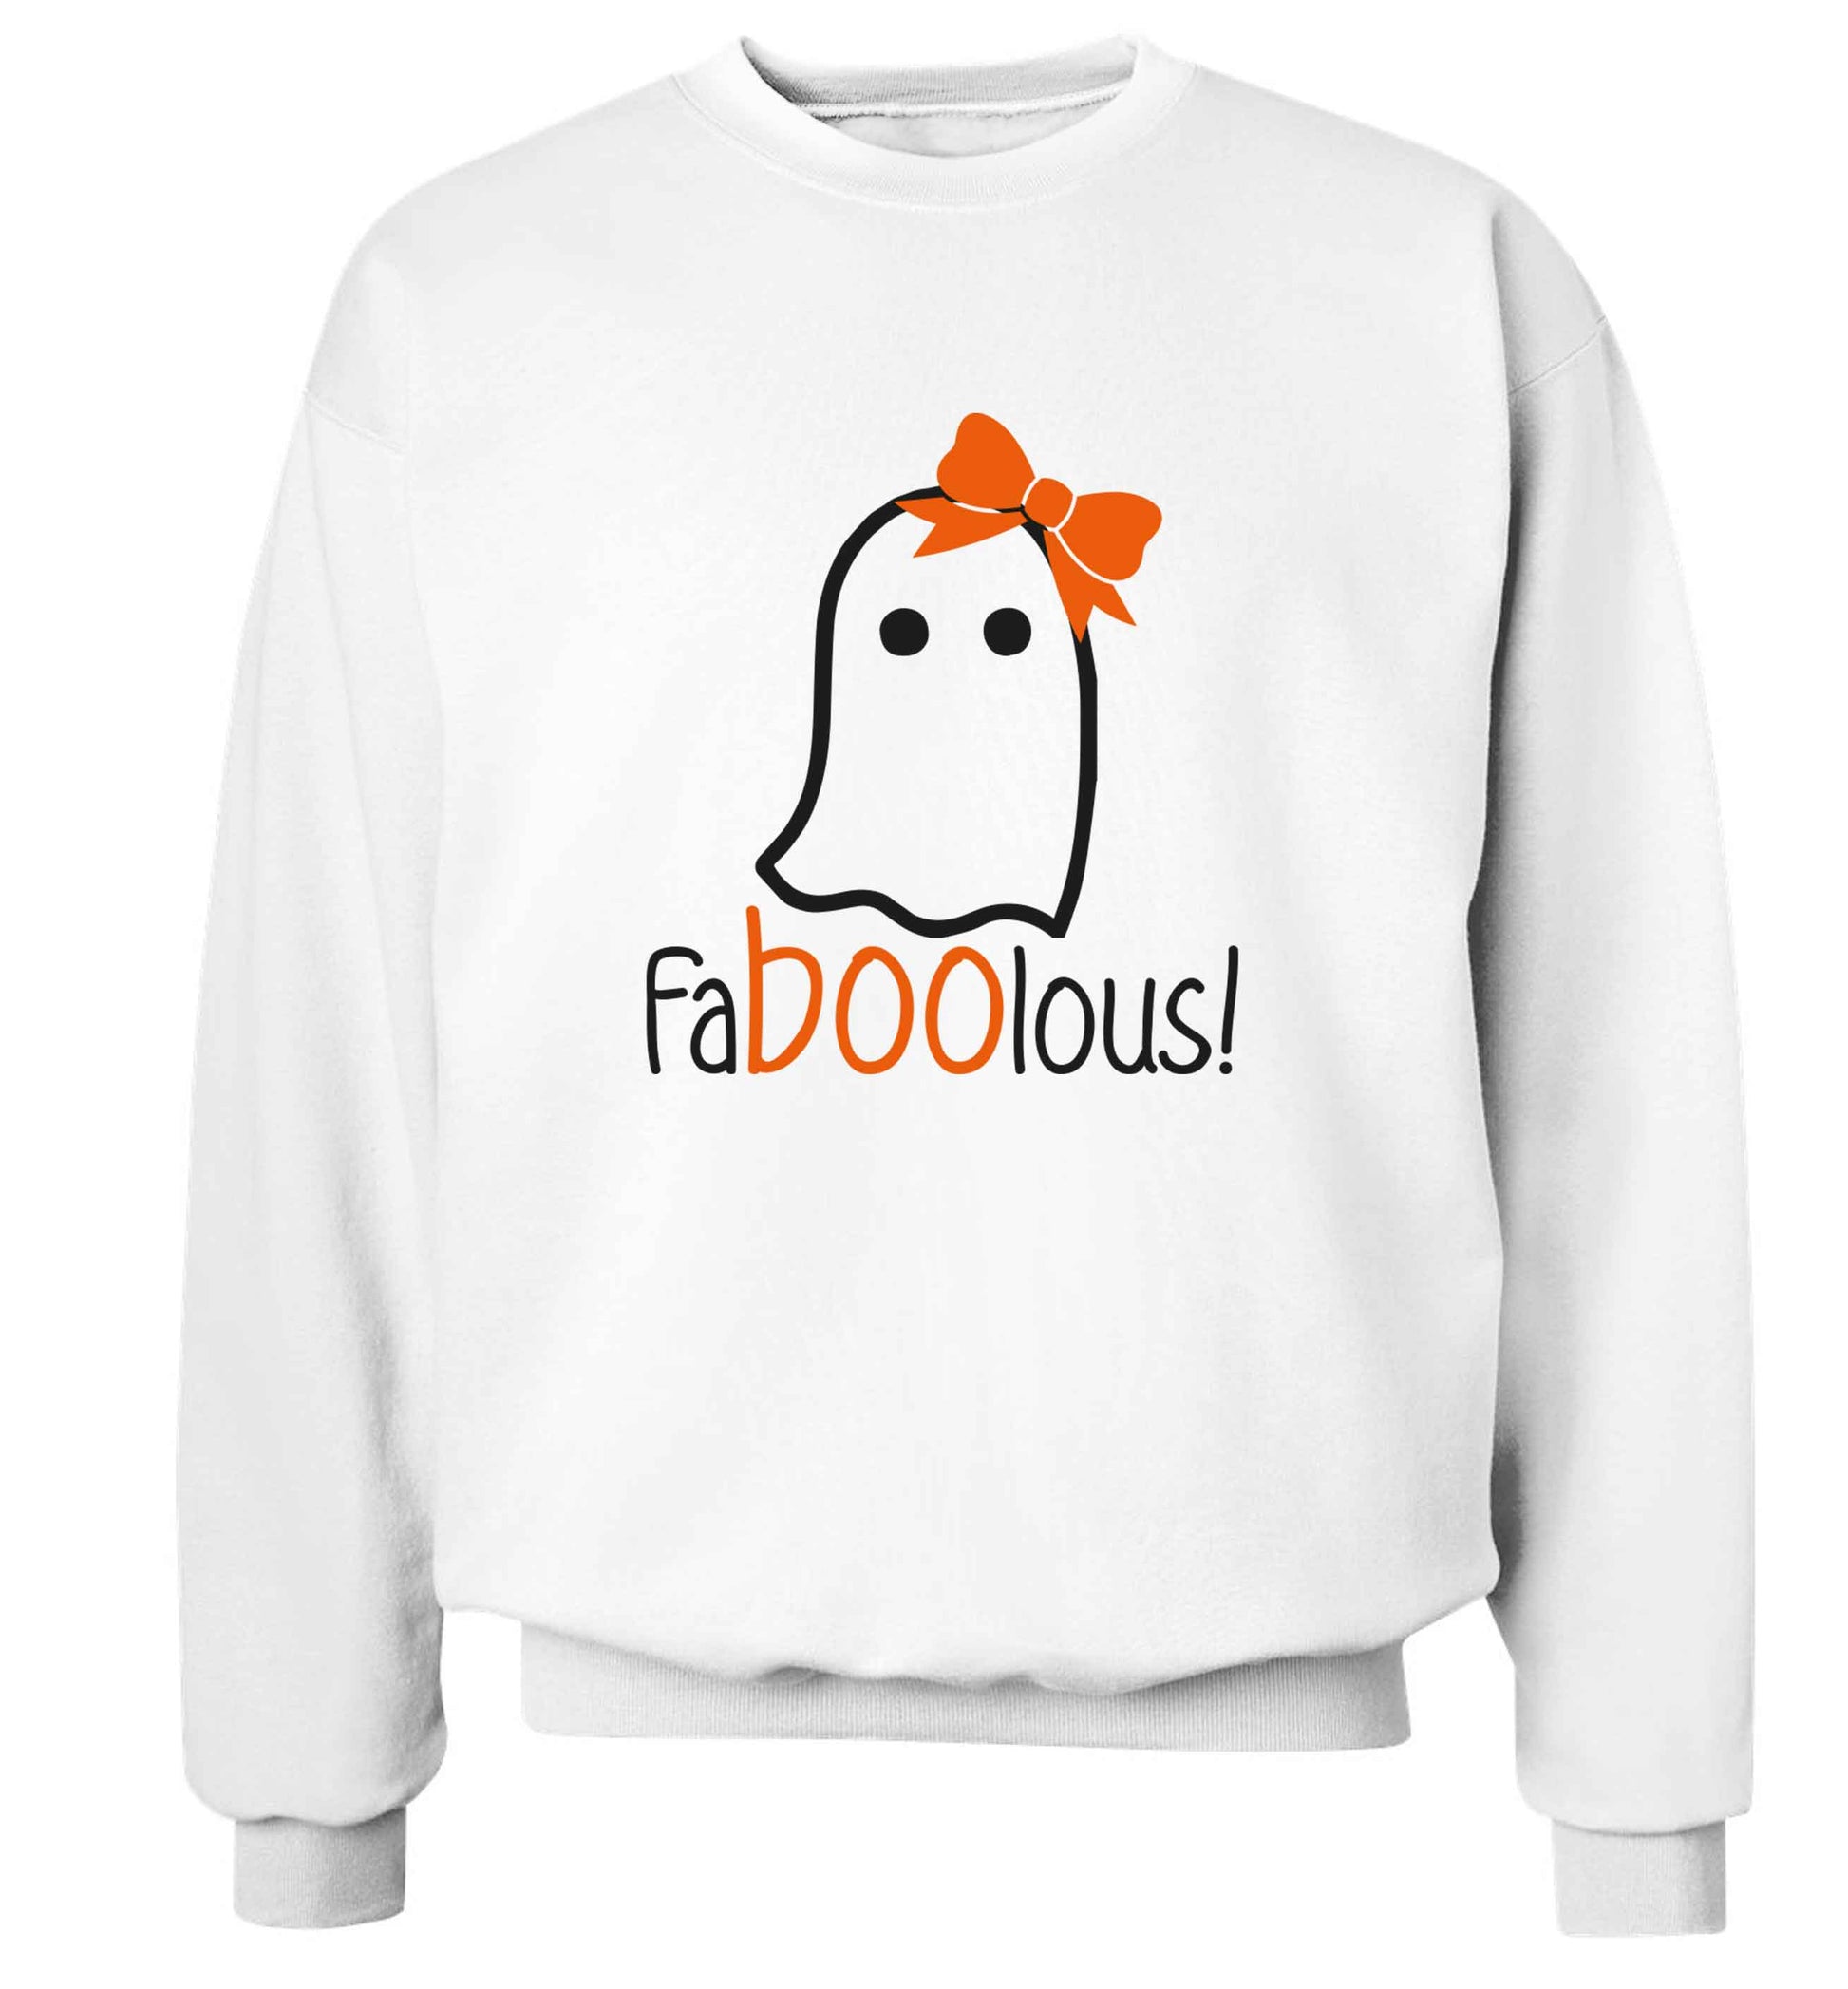 Faboolous ghost adult's unisex white sweater 2XL